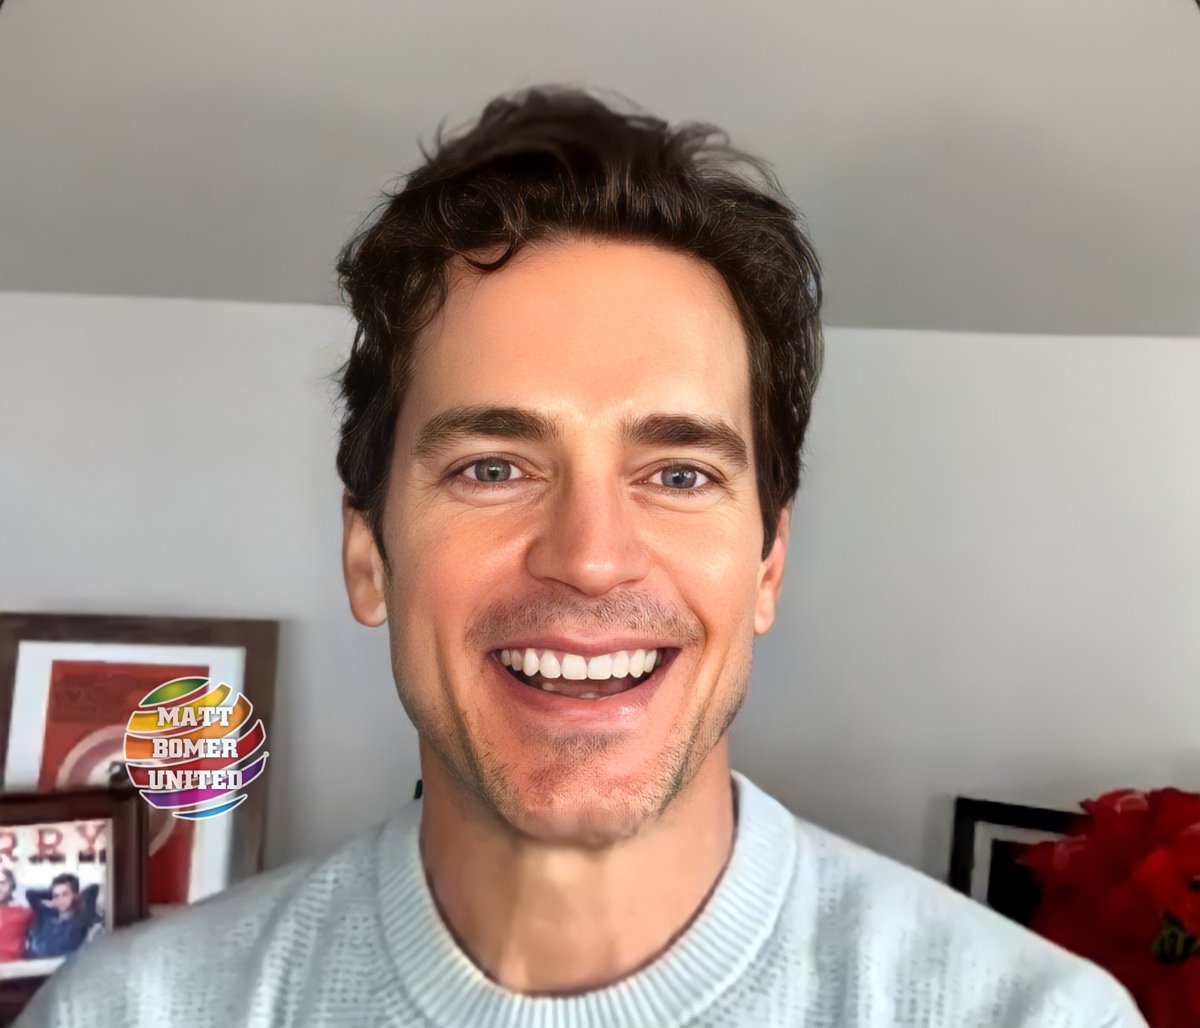 Finally for today, a few more screenshots of #MattBomer during his chat with #KimberlySnyder. We hope you've enjoyed this weekend's slightly more esoteric posts, see you tomorrow.